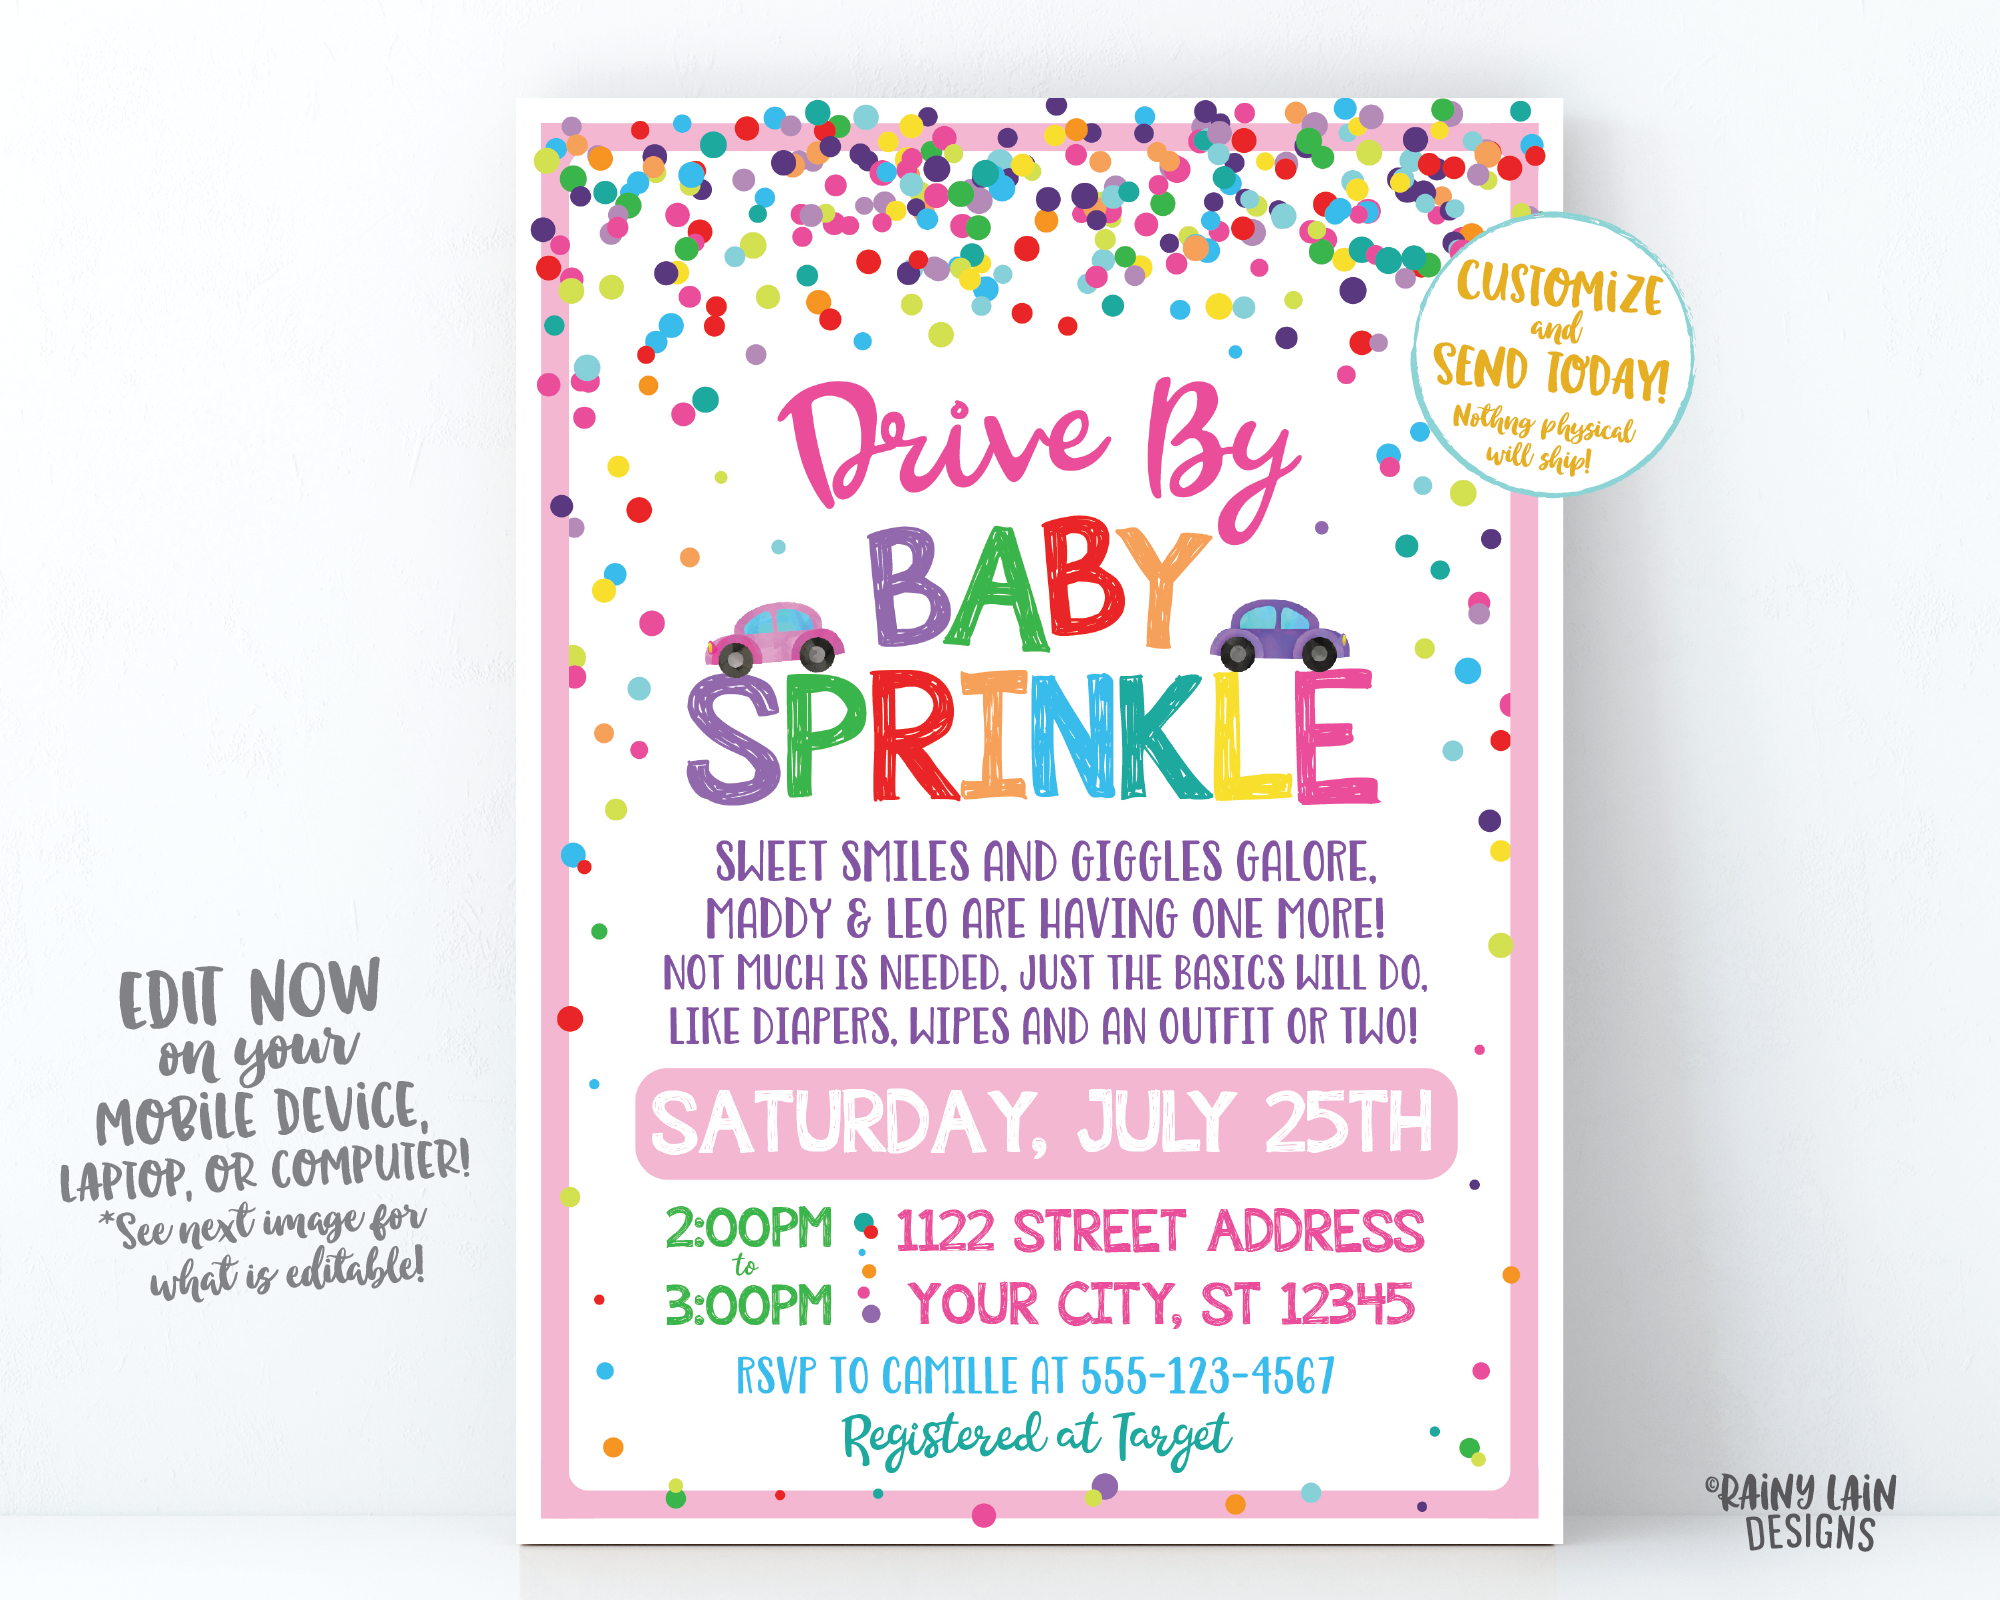 Drive By Baby Sprinkle Invitation Baby Sprinkle Drive By Invite Girl Sprinkle Drive By Parade Invite Girl Social Distancing Sprinkle Girl